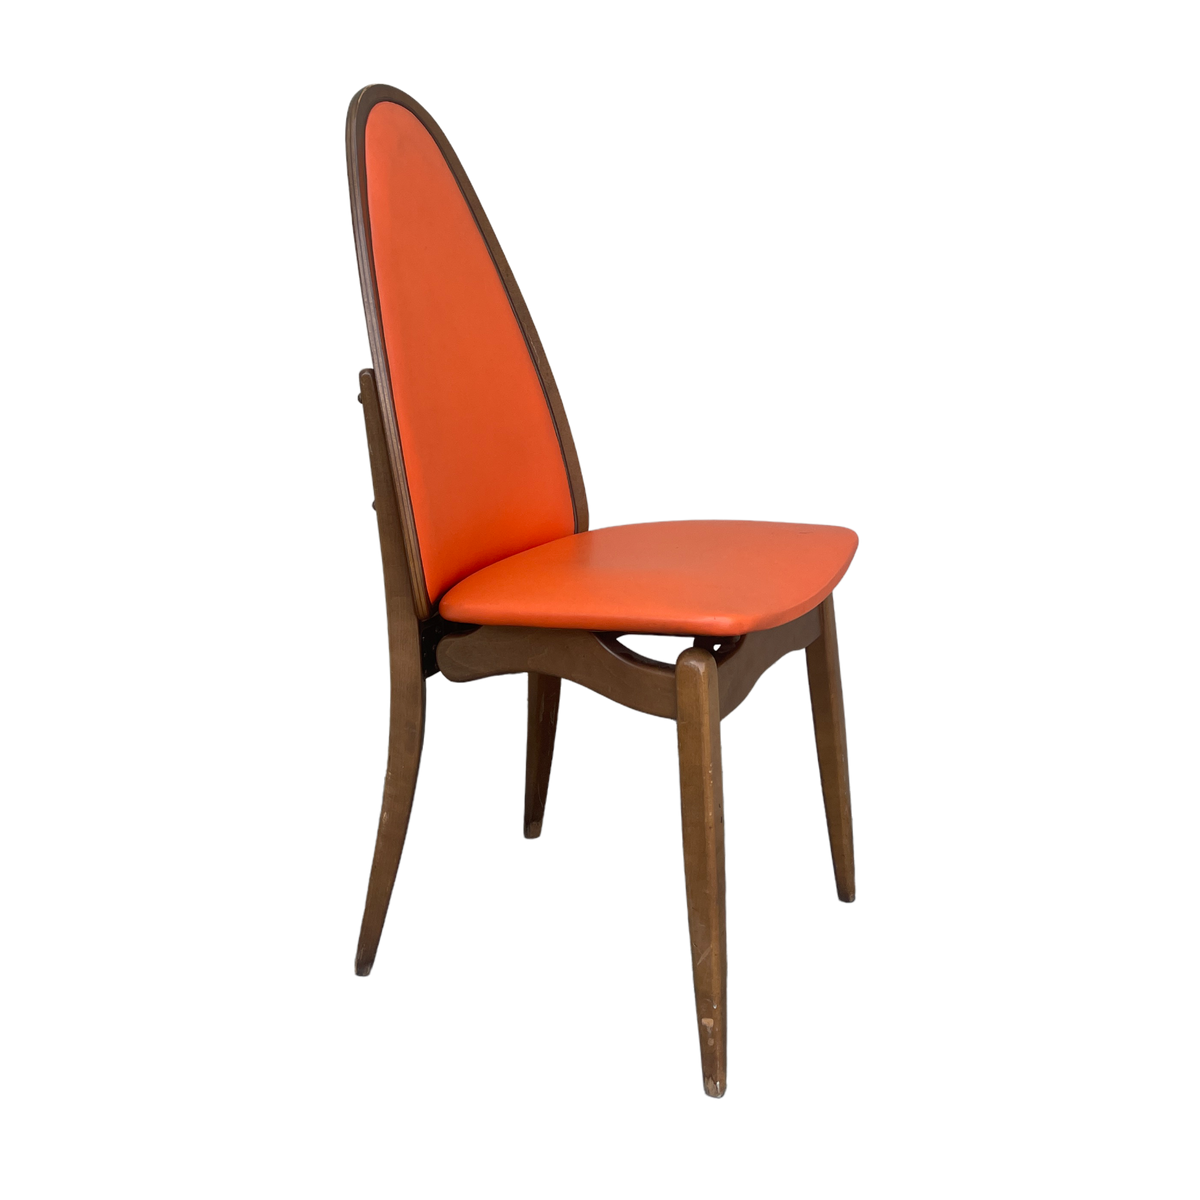 Stakmore Mid Century Chair